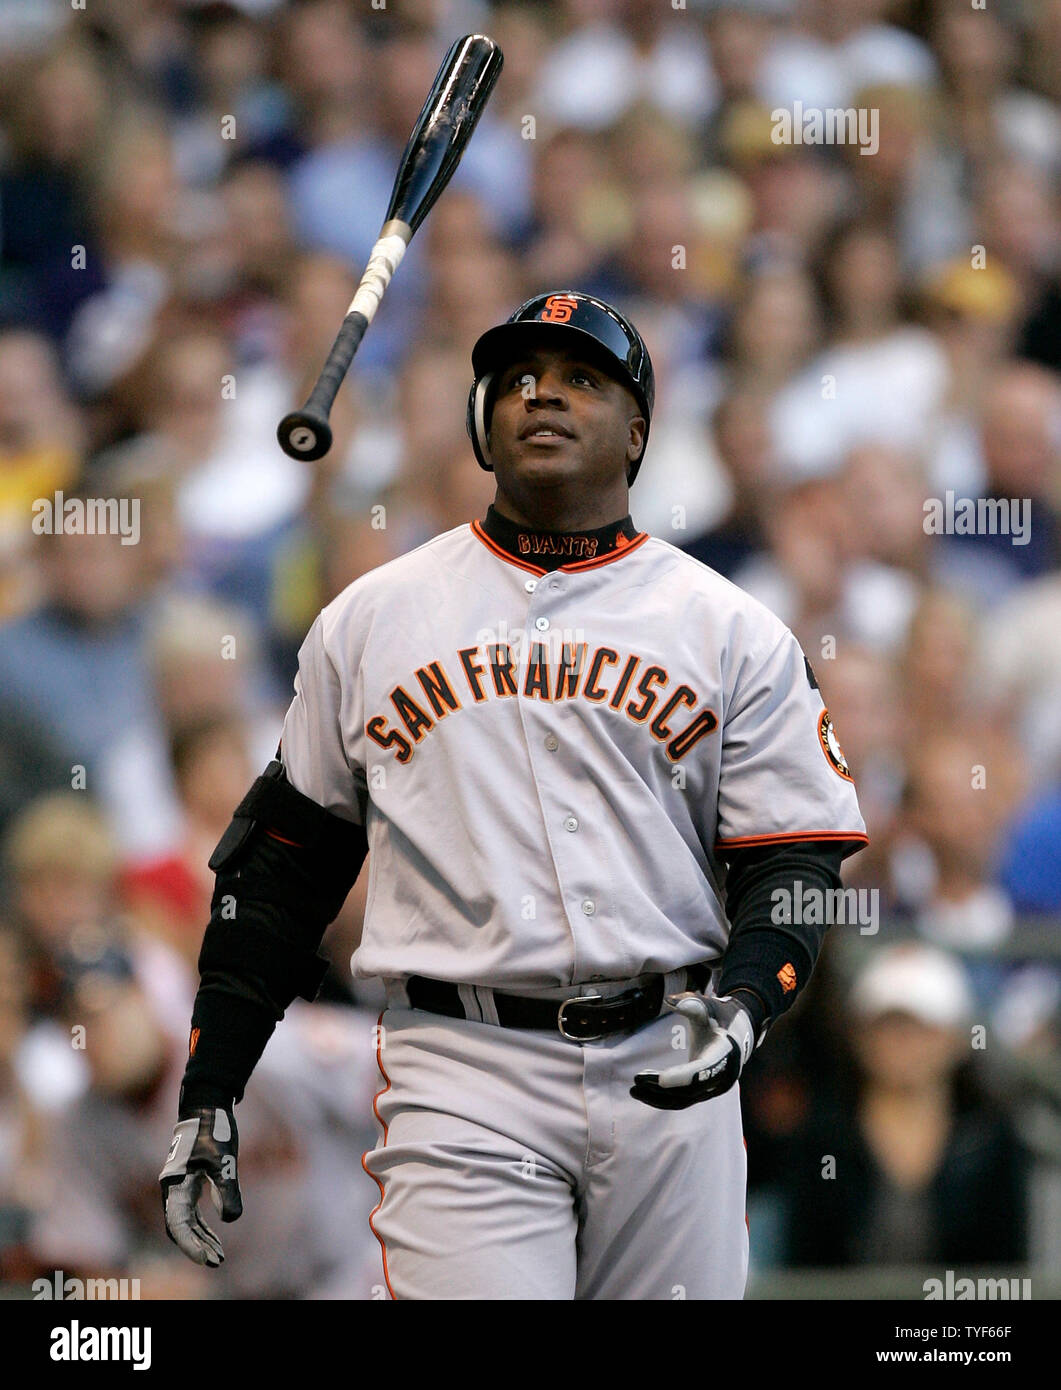 San Francisco Giants' Barry Bonds flips his bat after hitting a foul ball  during the second inning against the Milwaukee Brewers at Miller Park in  Milwaukee, Wisconsin on July 20, 2007. (UPI